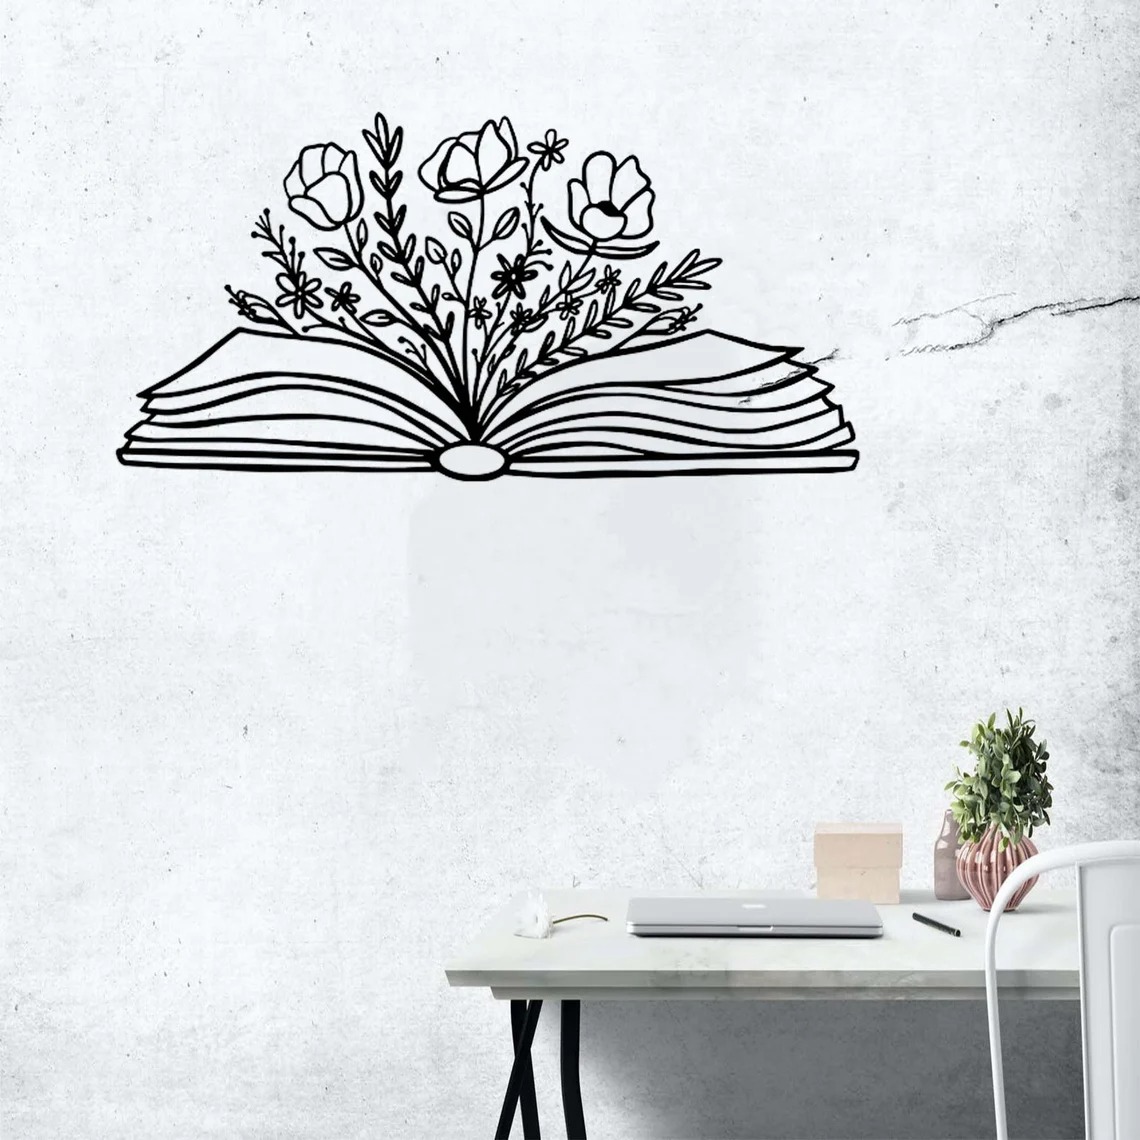 Book with Flowers Metal Wall Art Book Lover Gift Library Wall Decor -  Custom Laser Cut Metal Art & Signs, Gift & Home Decor